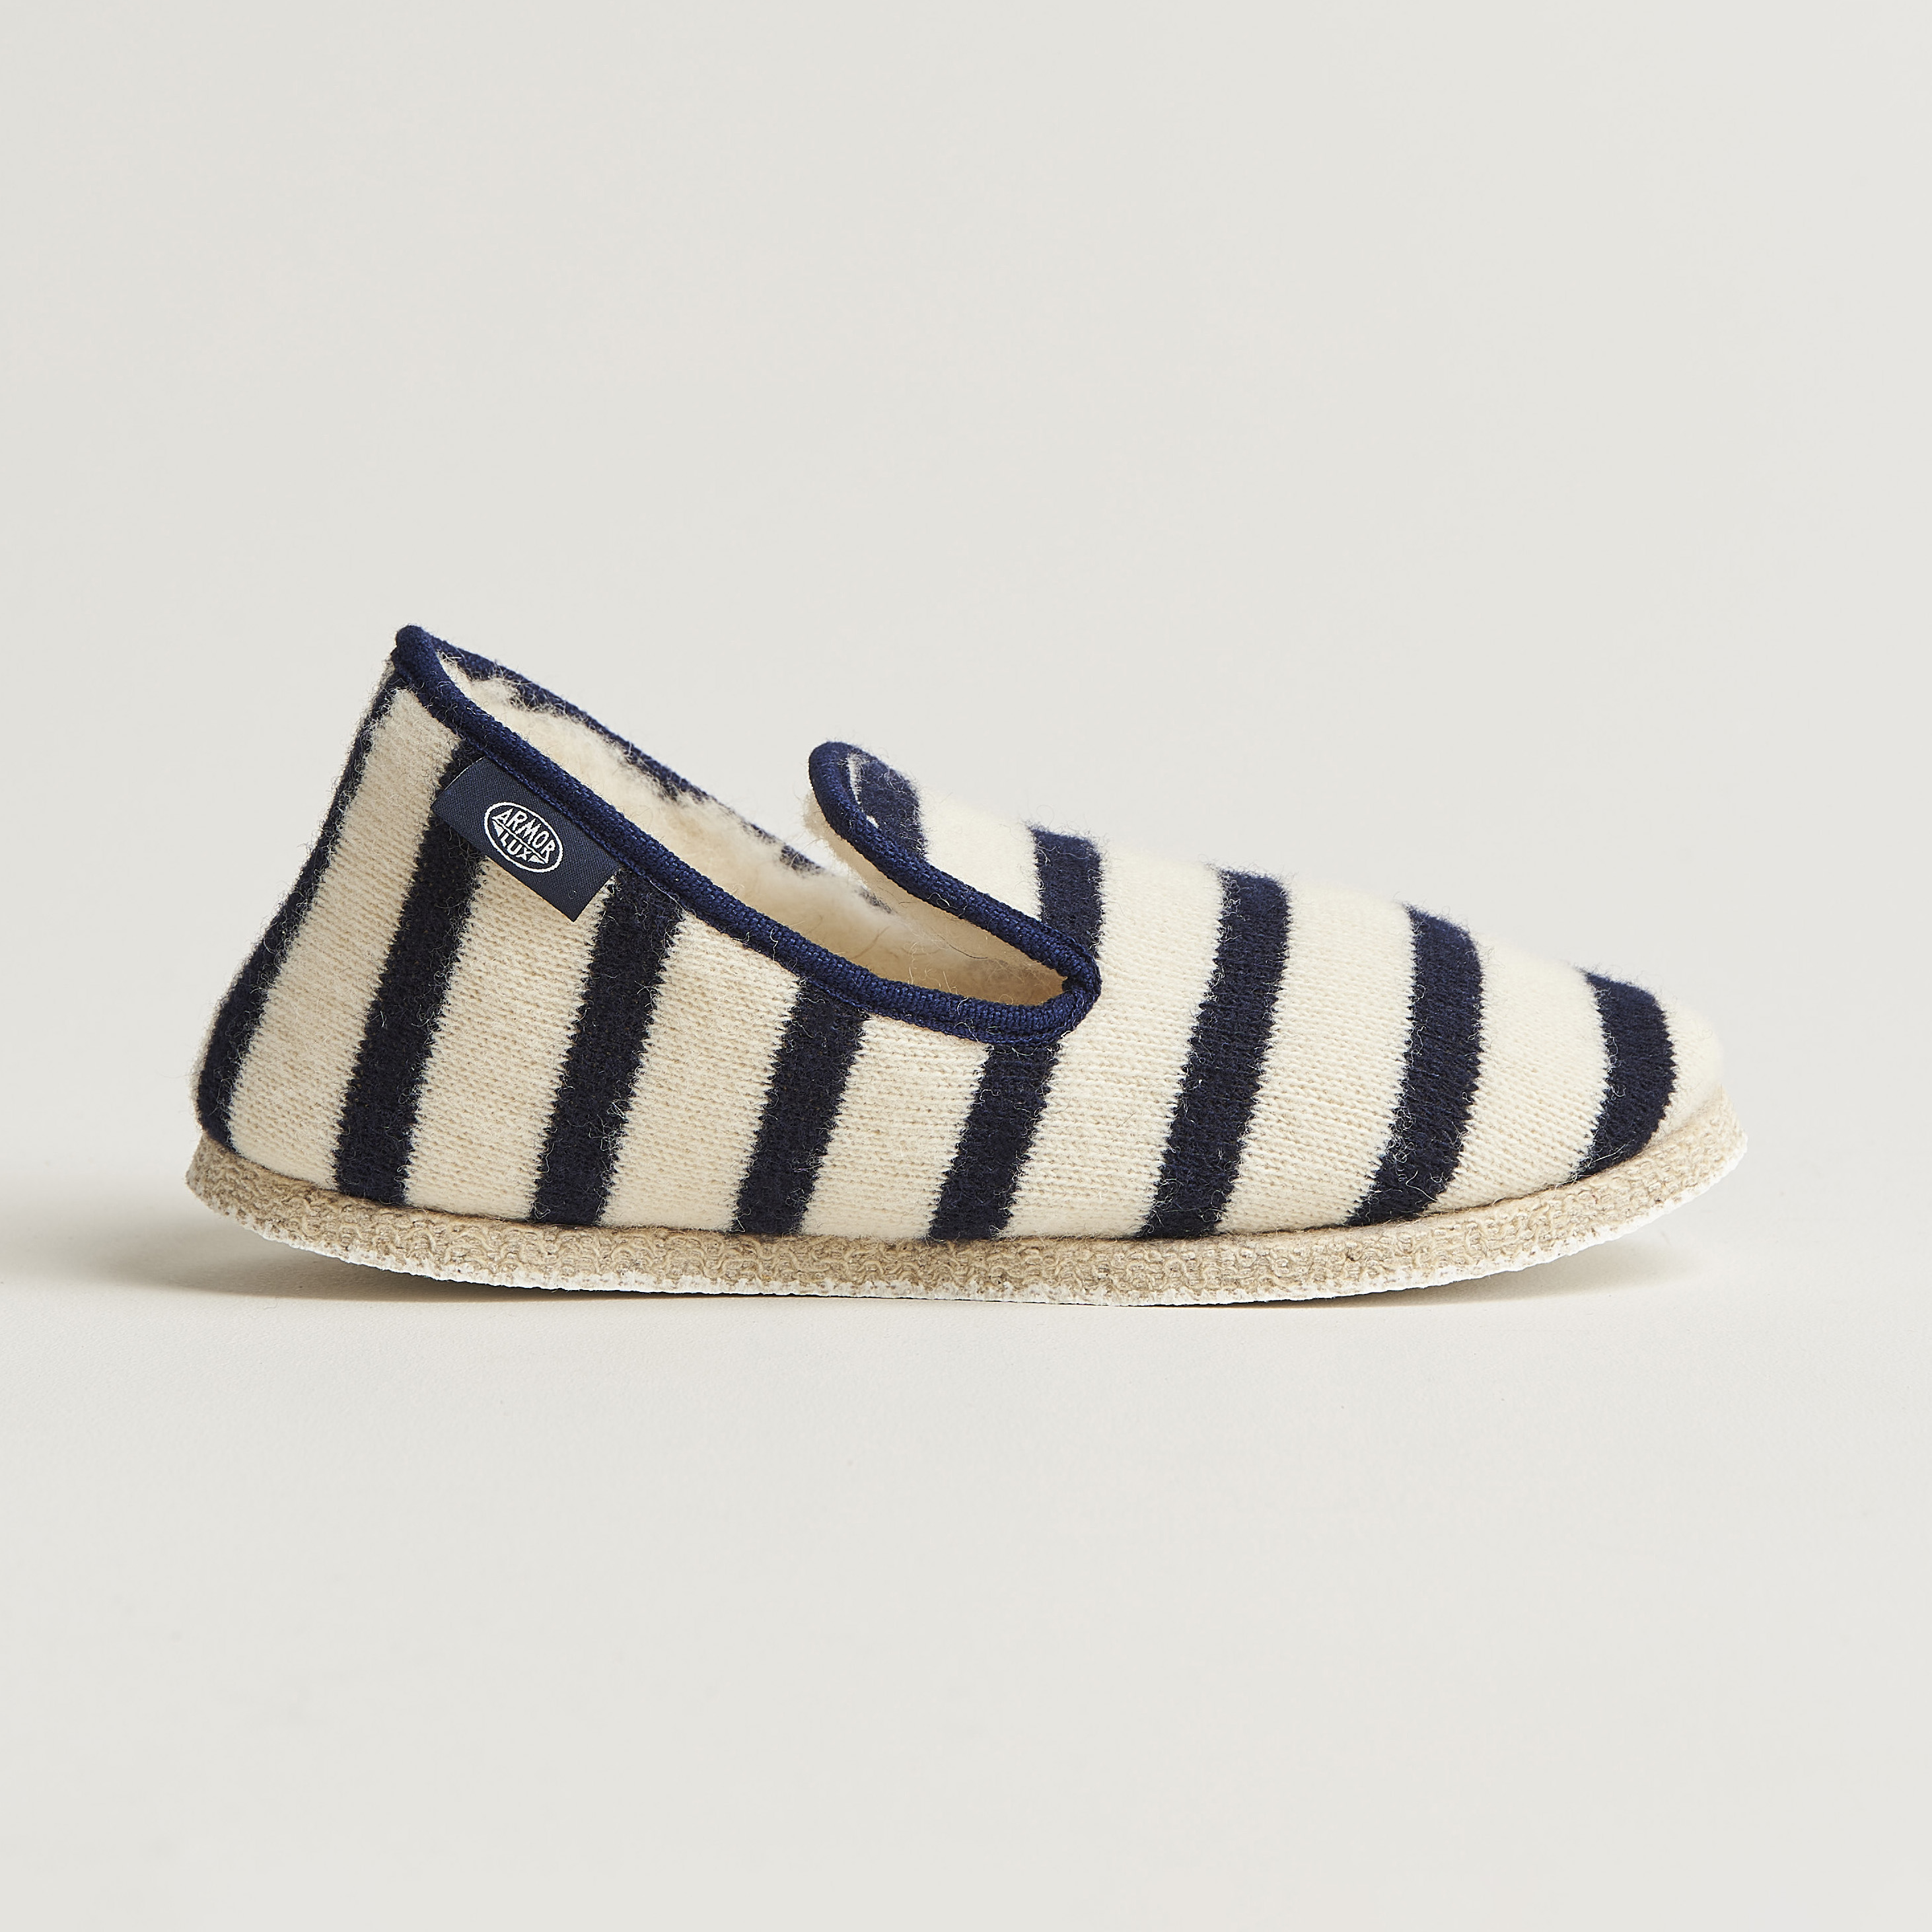 Armor-lux Maoutig Home Slippers Nature/Navy CareOfCarl.dk